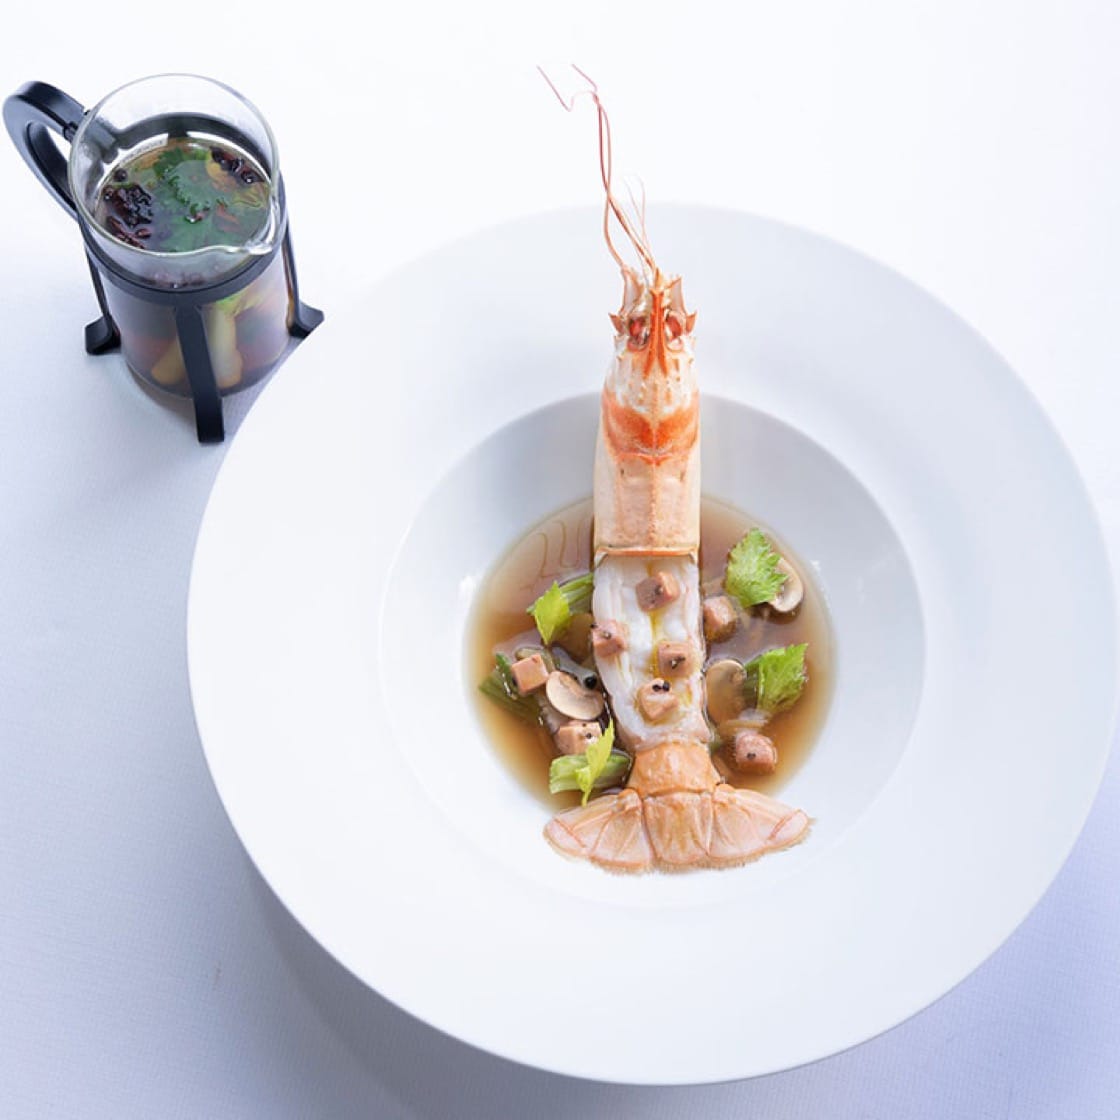 michelin starred nomicos a foodies review of paris modern cuisine gem